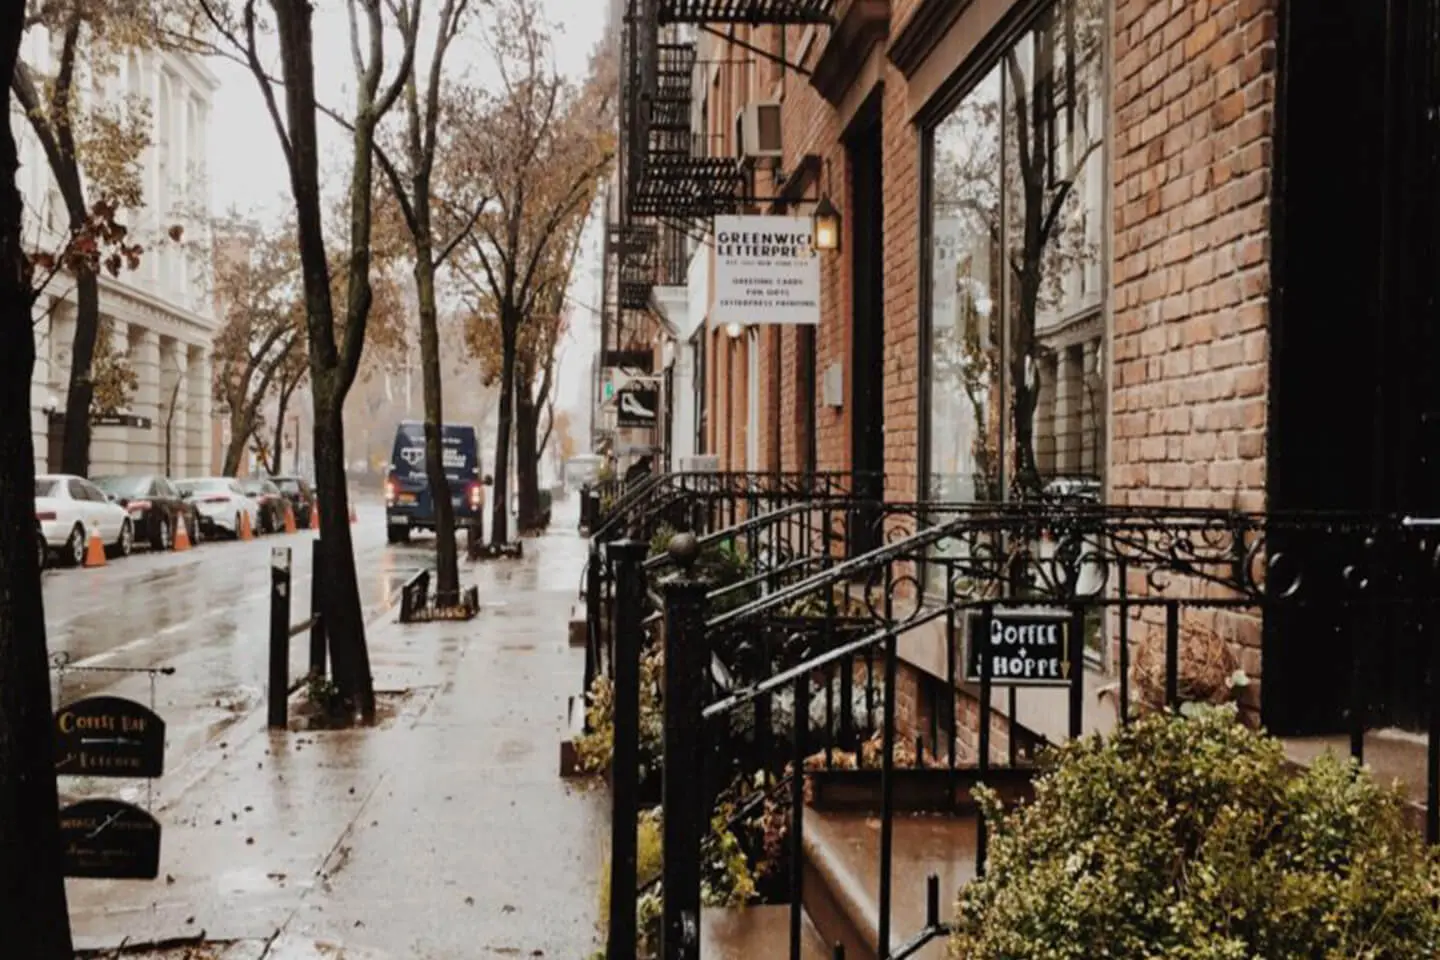 A rainy day on a Manhattan city street with wet sidewalks, bare trees, and a coffee shop's entrance.